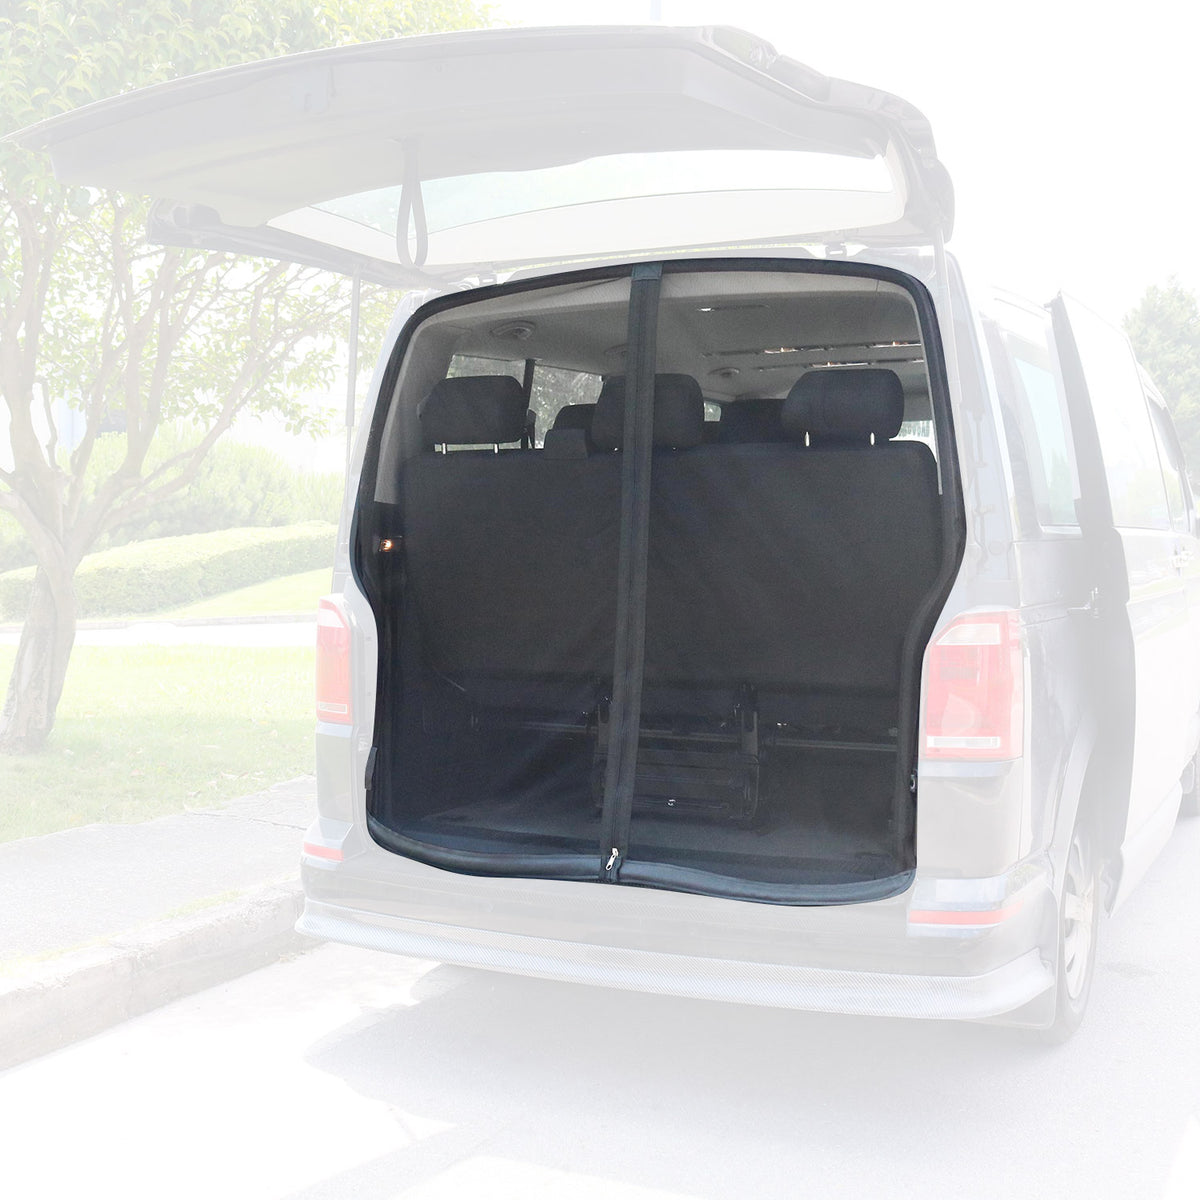 Mosquito net magnetic insect protection for VW Transporter T5 2003-2015 tailgate